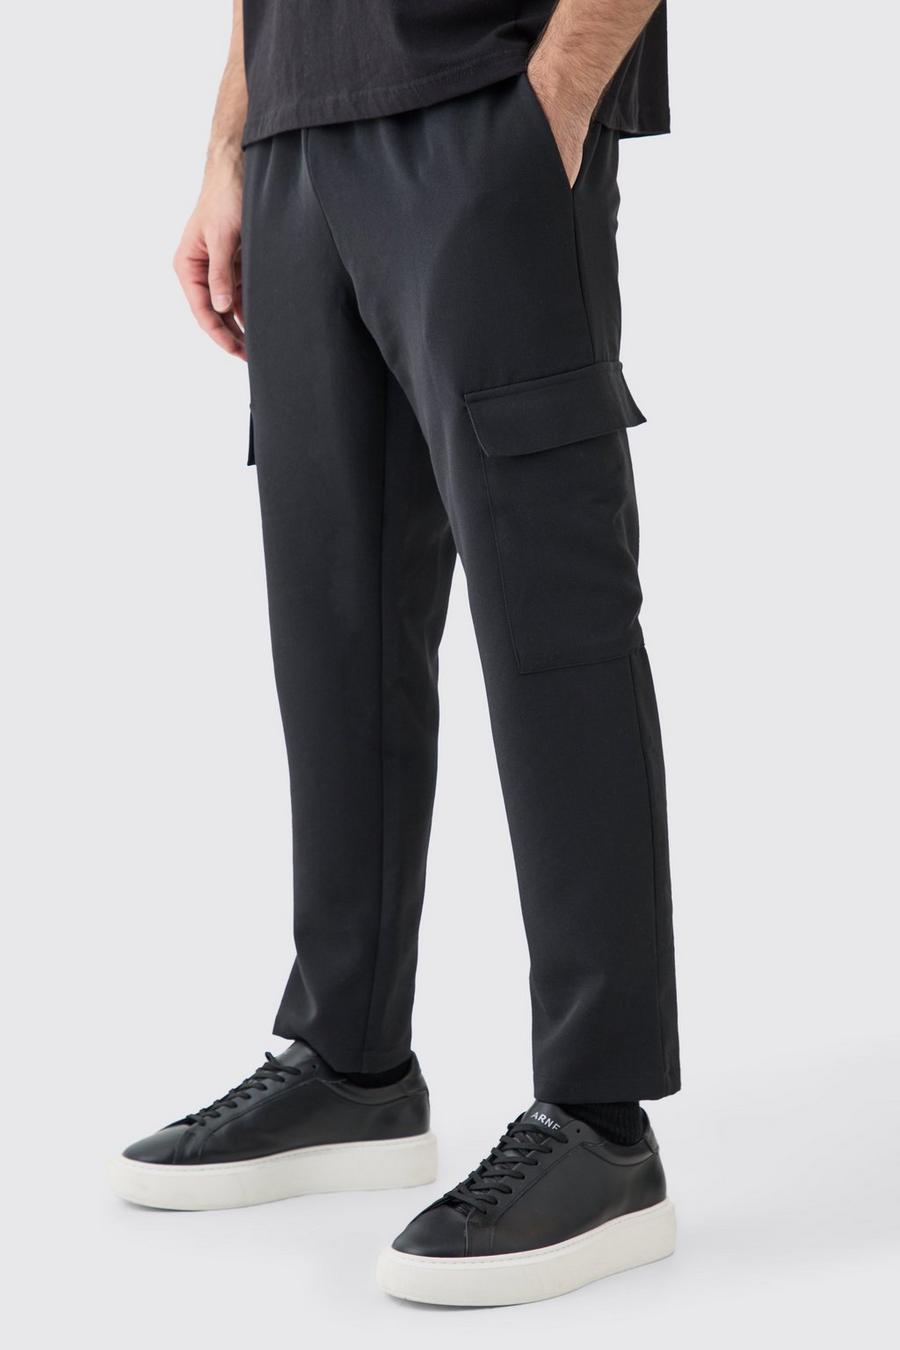 Black Elasticated Waist Tapered Cargo Trousers